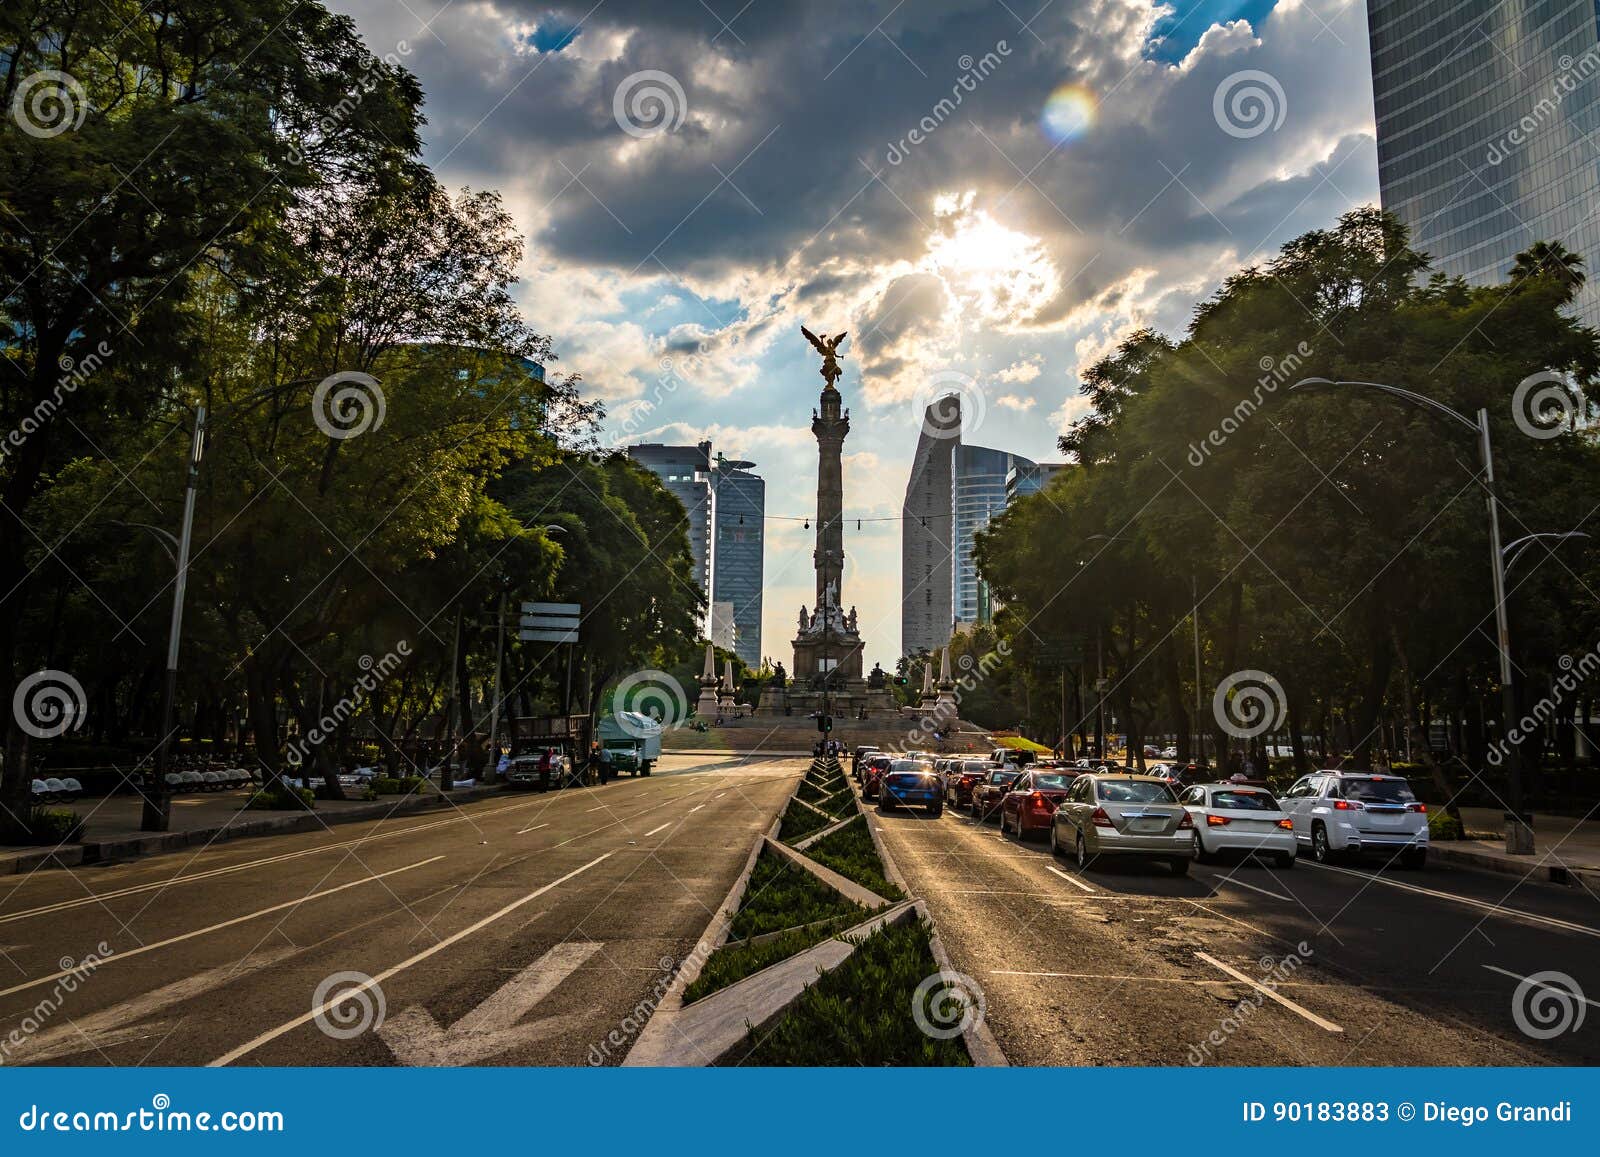 paseo de la reforma avenue and angel of independence monument - mexico city, mexico